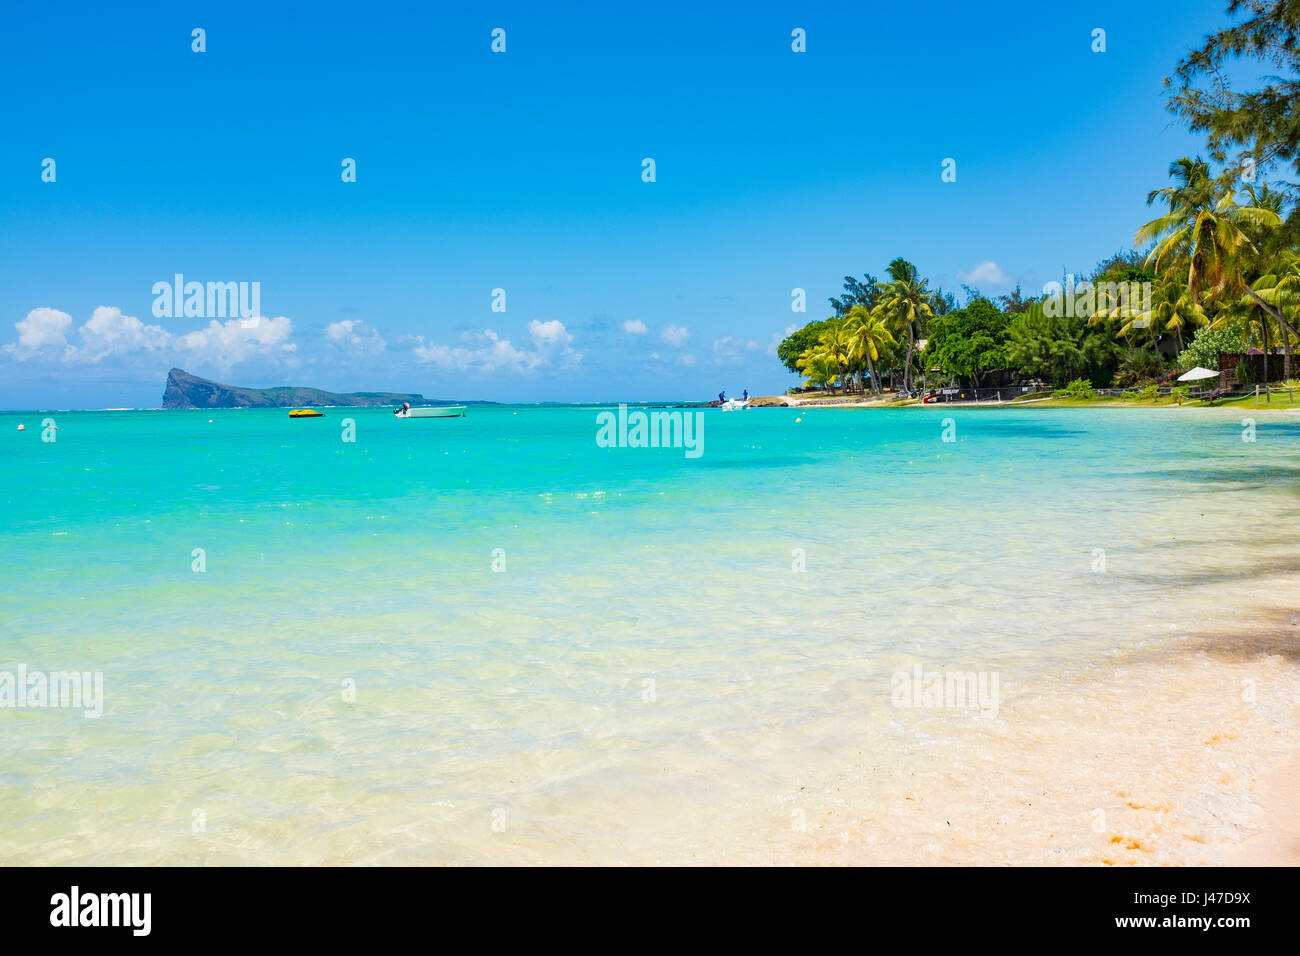 Beach on the tropical island. Clear blue water, sand and palm trees. Beautiful vacation spot, treatment and aquatics. Stock Photo